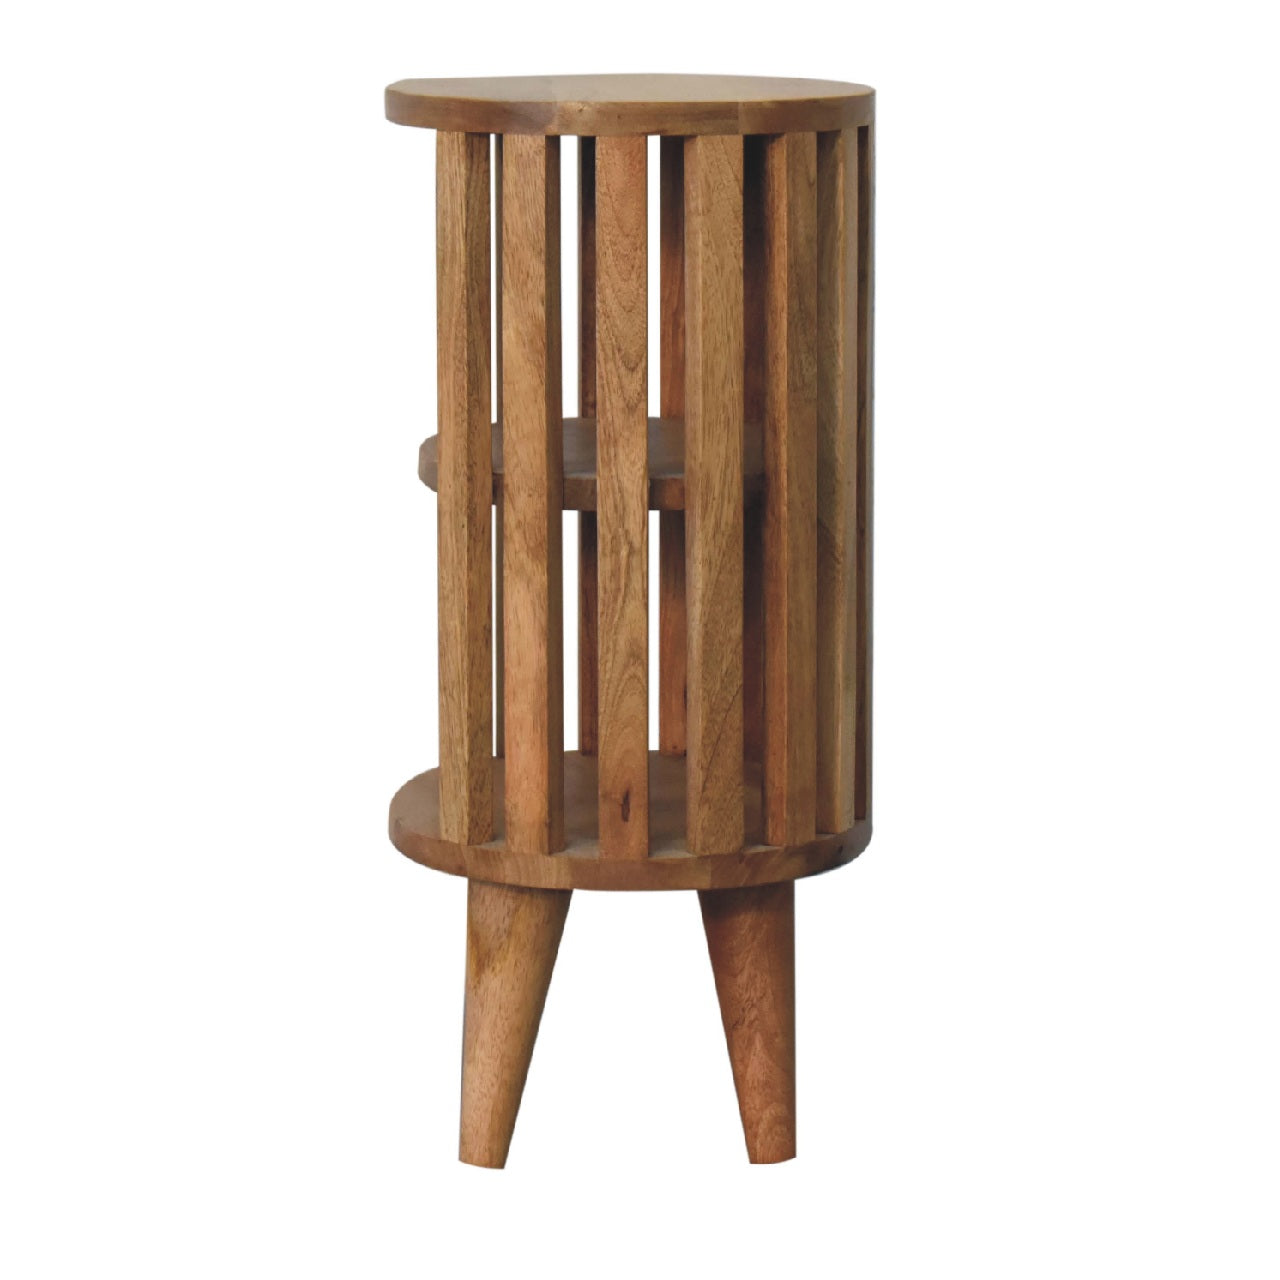 Natural wooden bedside table with slatted design and double shelf